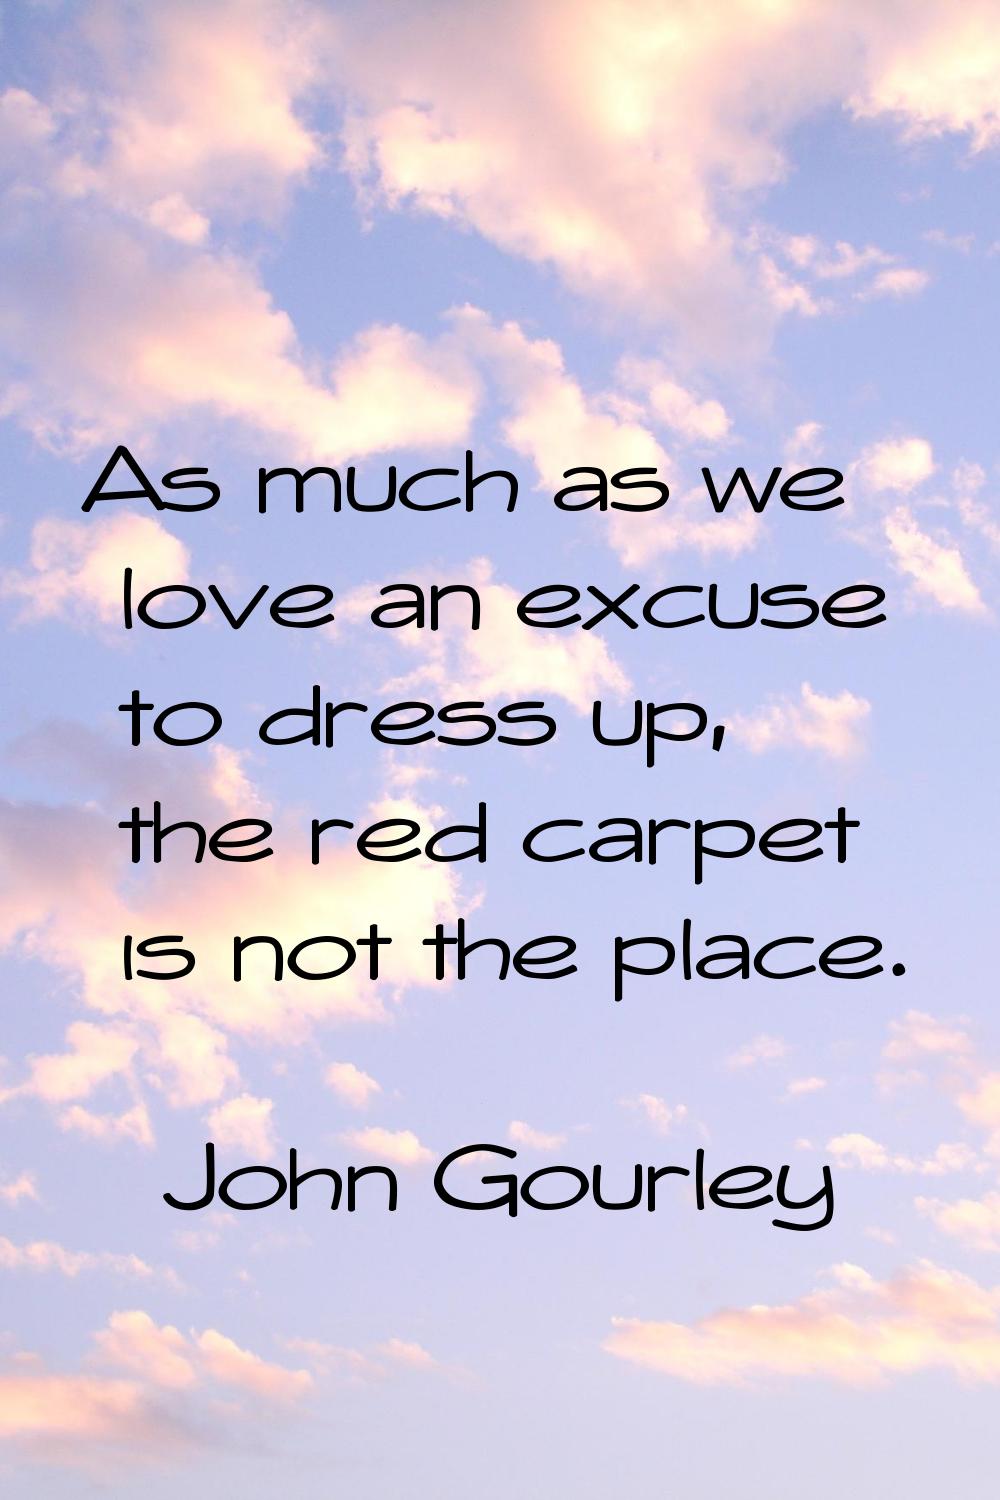 As much as we love an excuse to dress up, the red carpet is not the place.